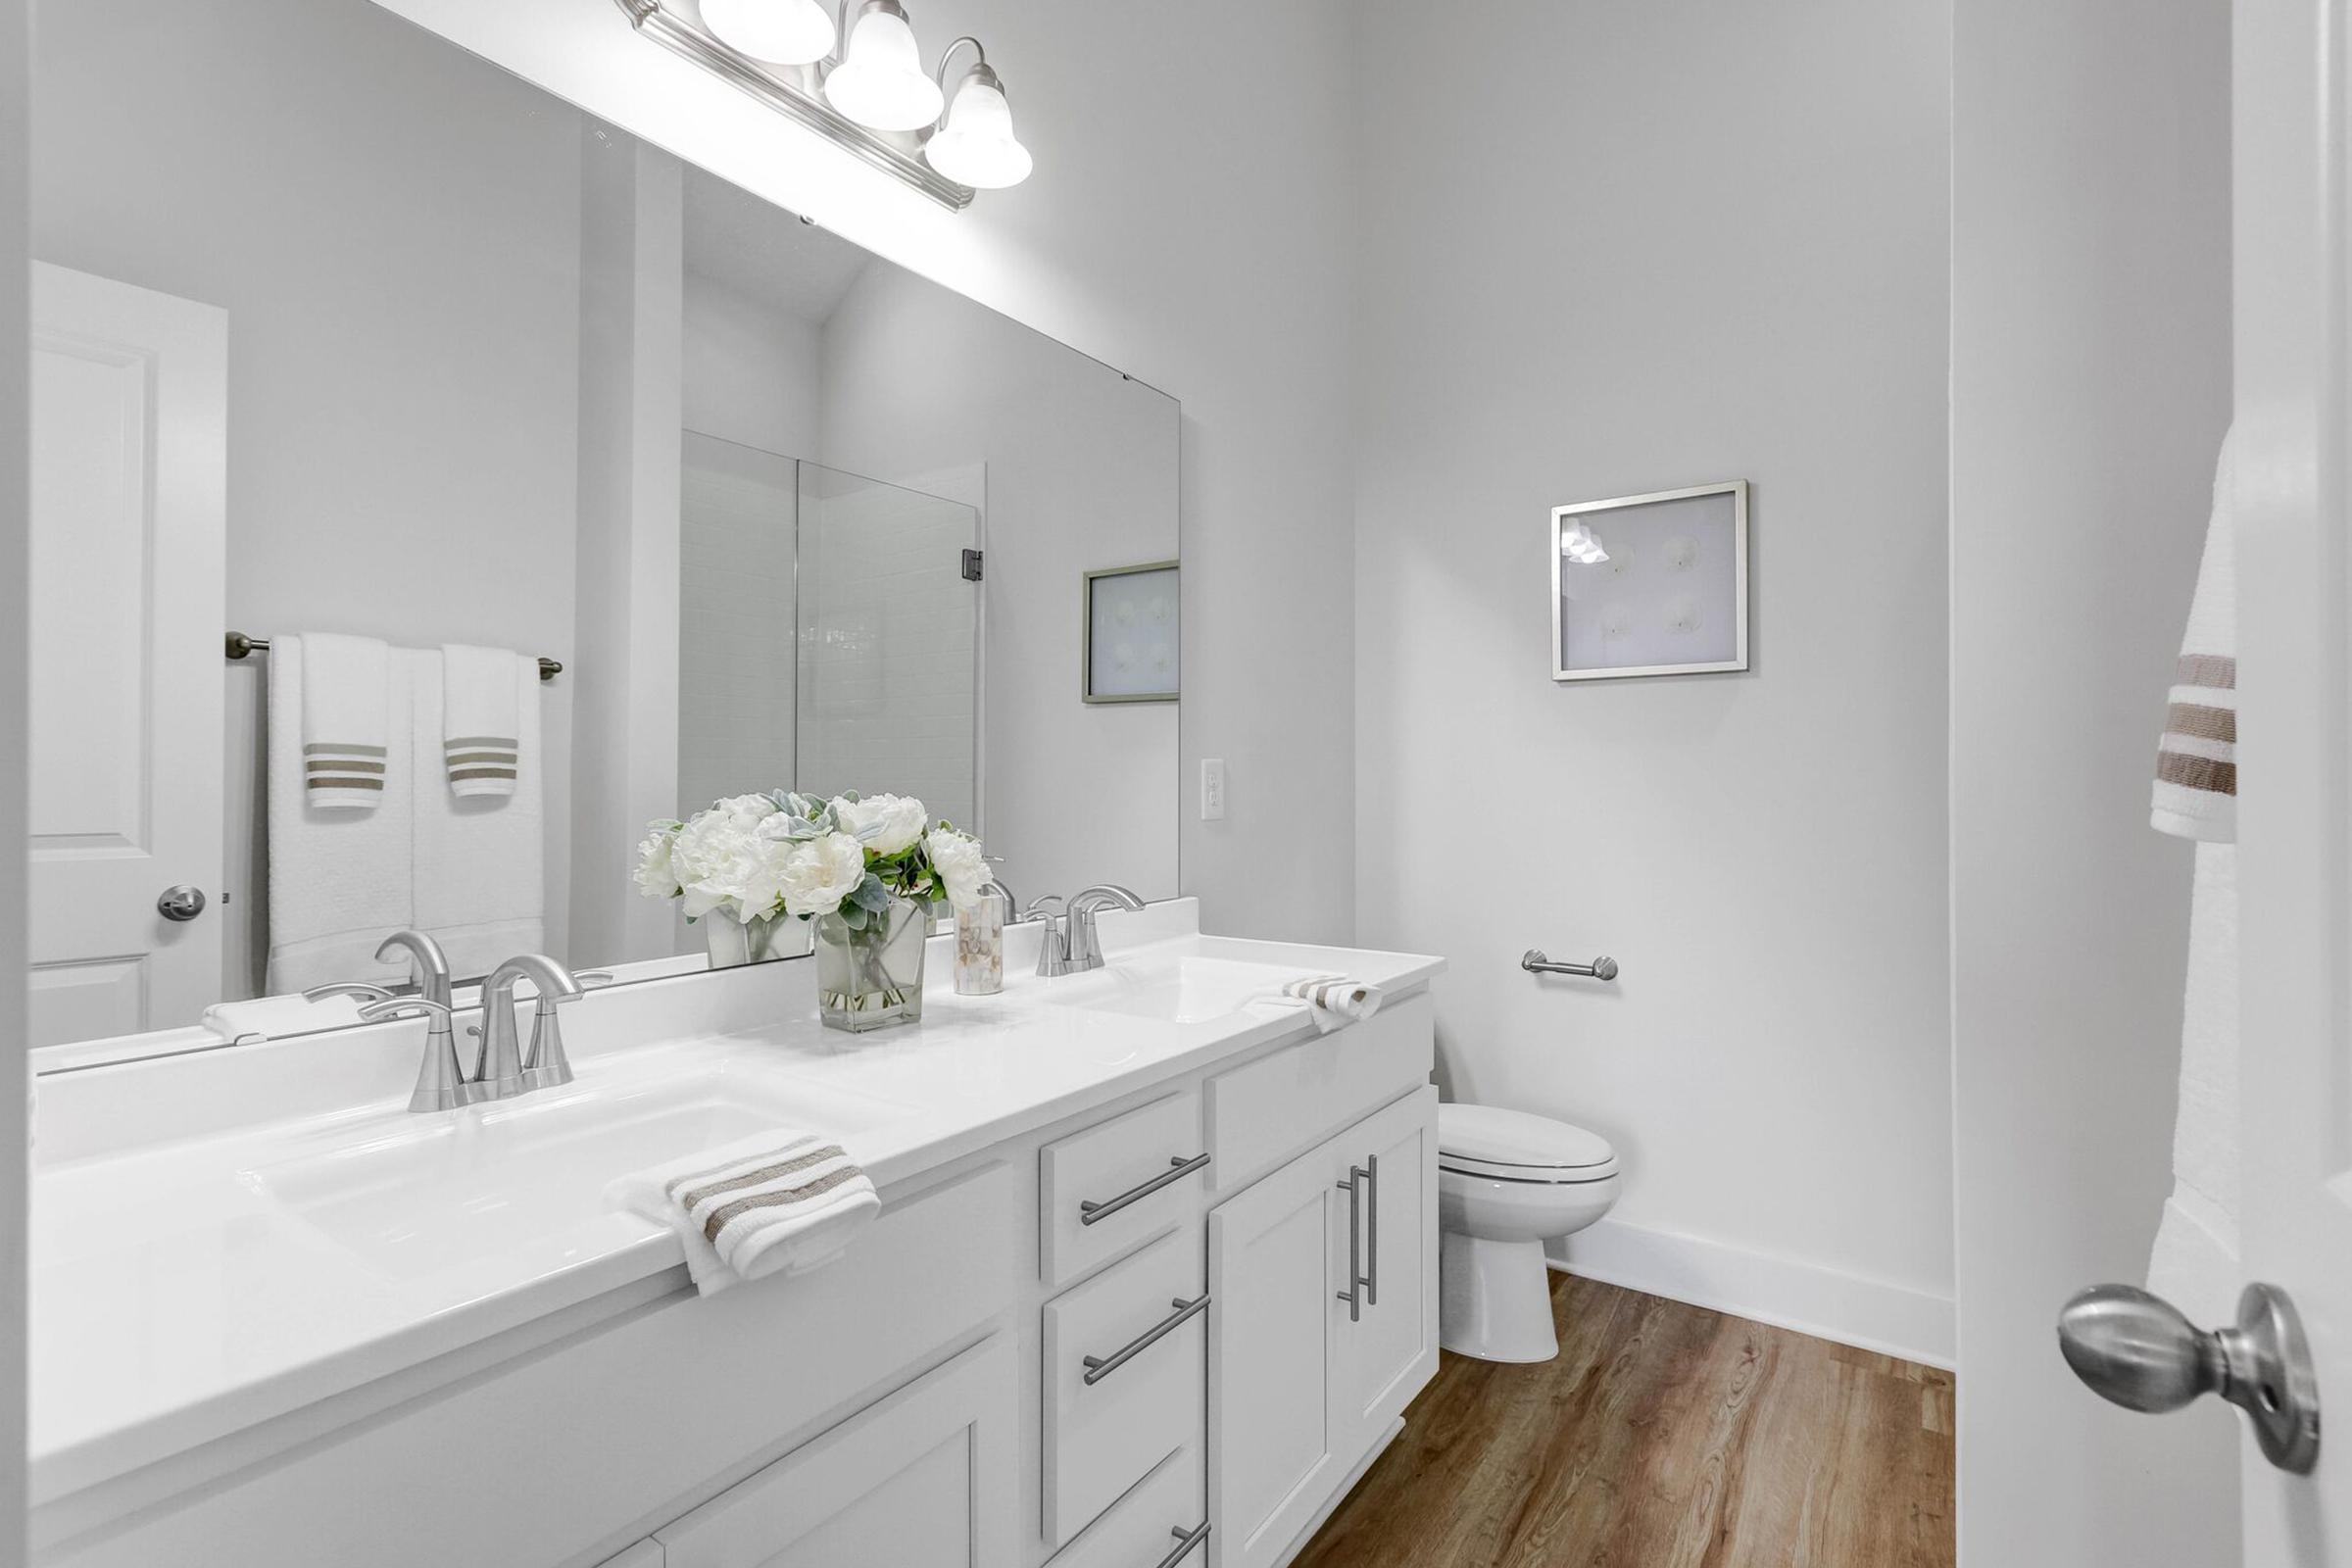 Modern bathrooms at The Townhomes at Beau Rivage in Wilmington, North Carolina.